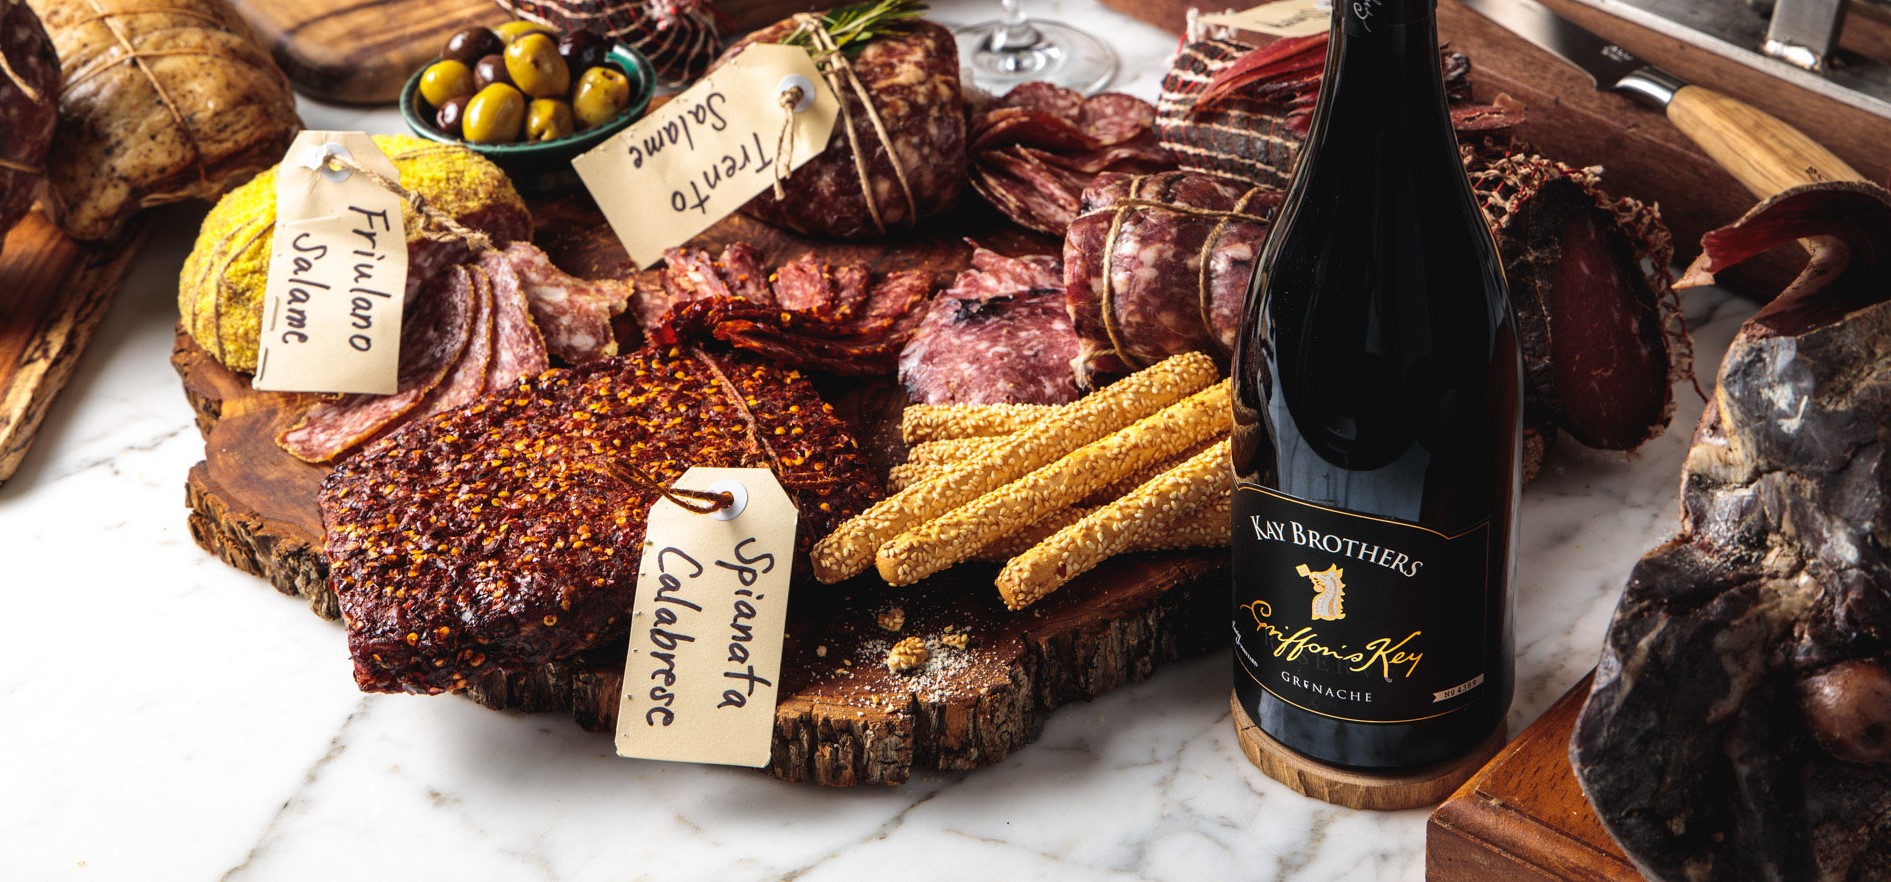 Kay Brothers Grenache & Charcuterie platter